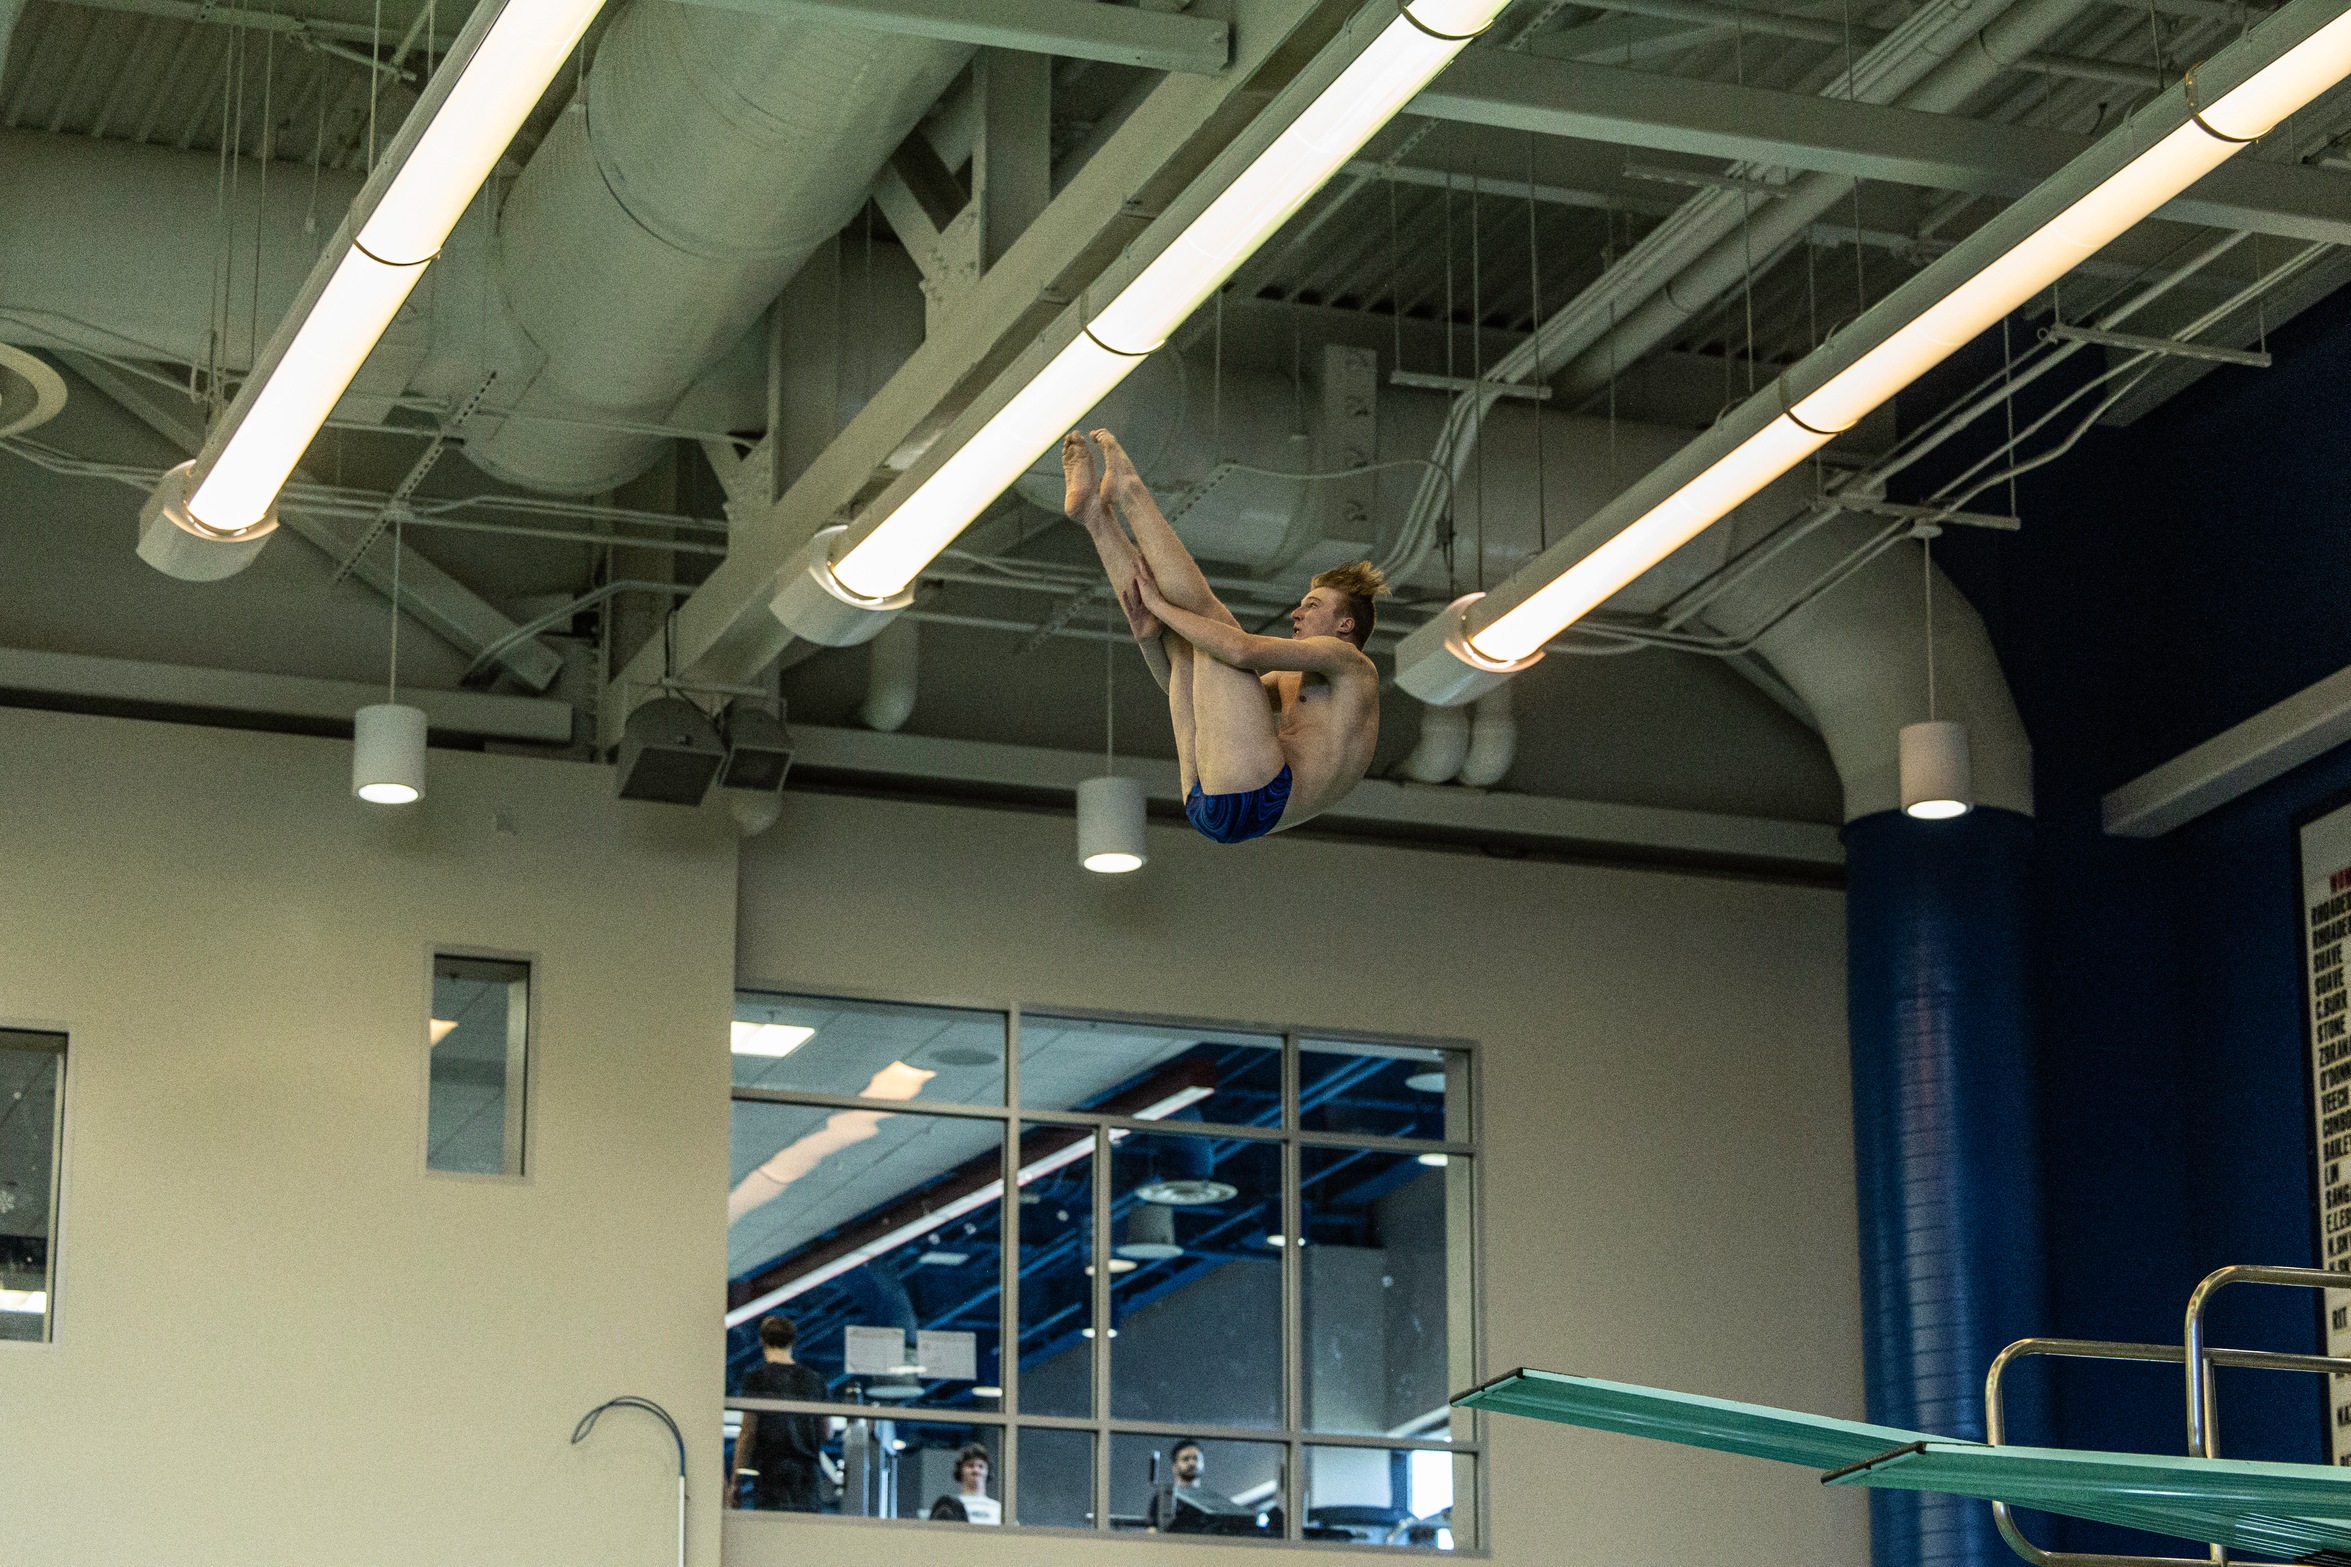 Compton Tallied A Ninth Place Finish On The 1-Meter Board